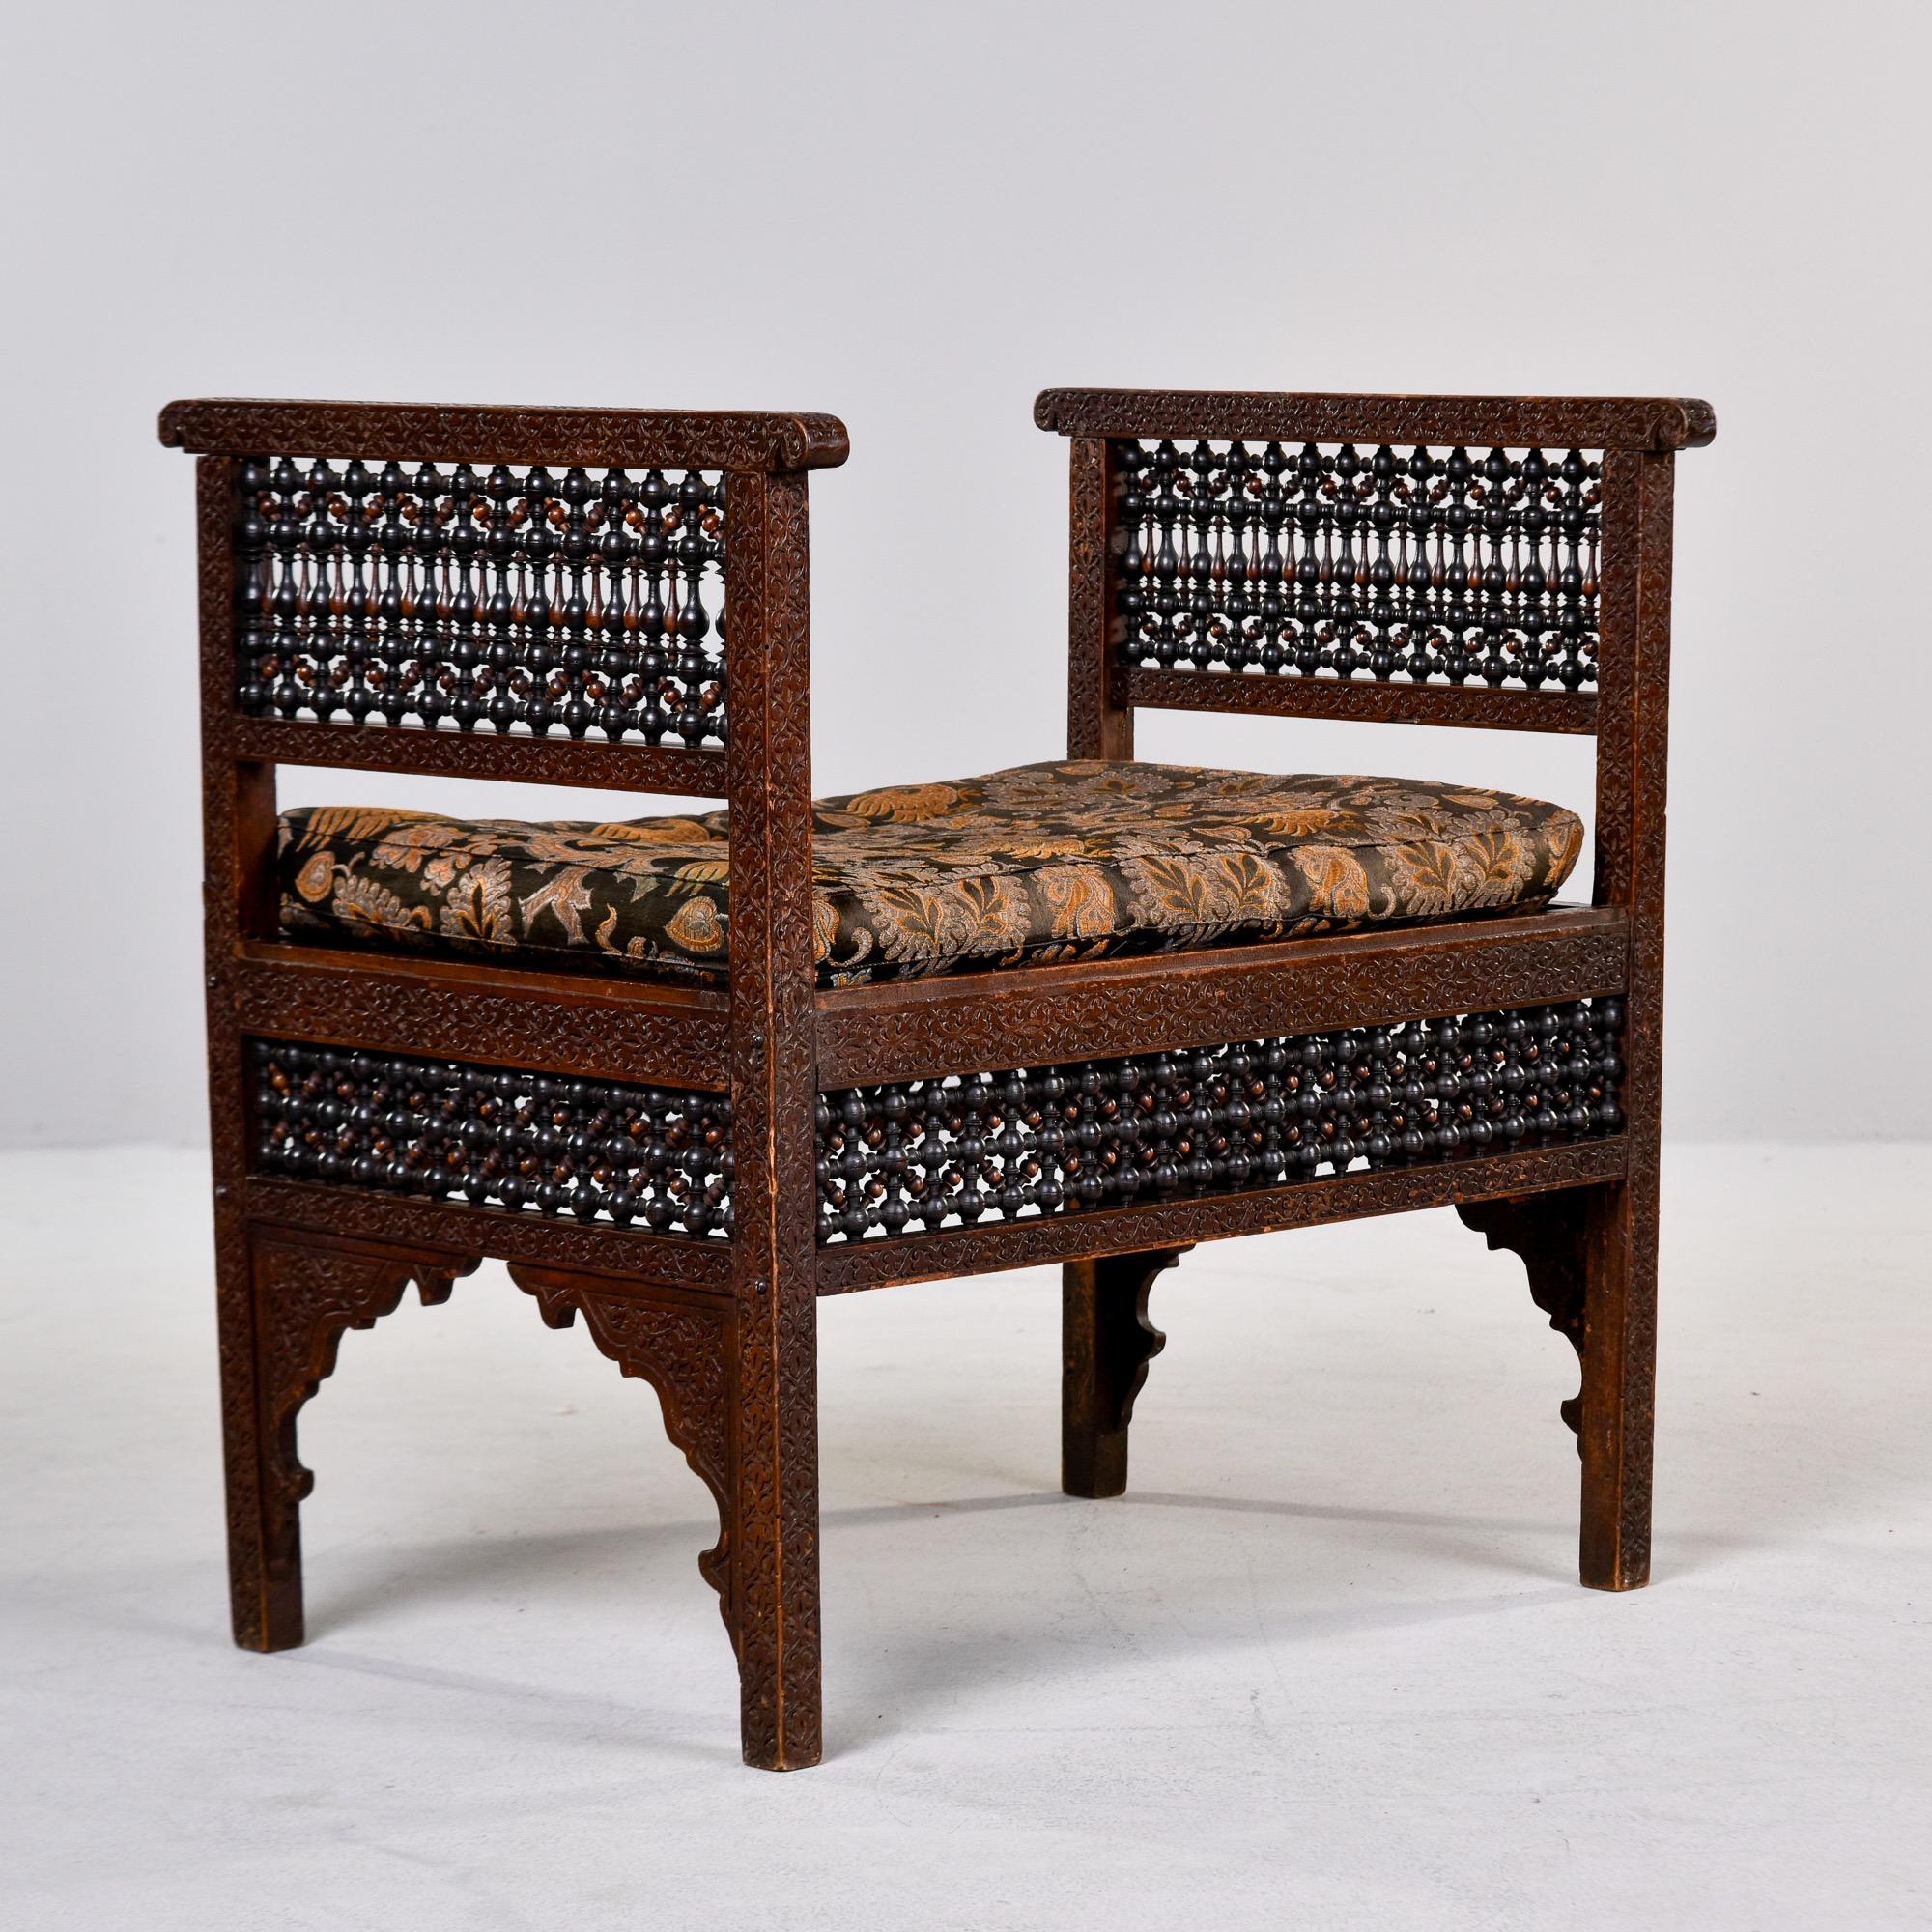 Early 20th C Heavily Carved Teak Moorish Bench With Tall Sides and Cushion For Sale 3